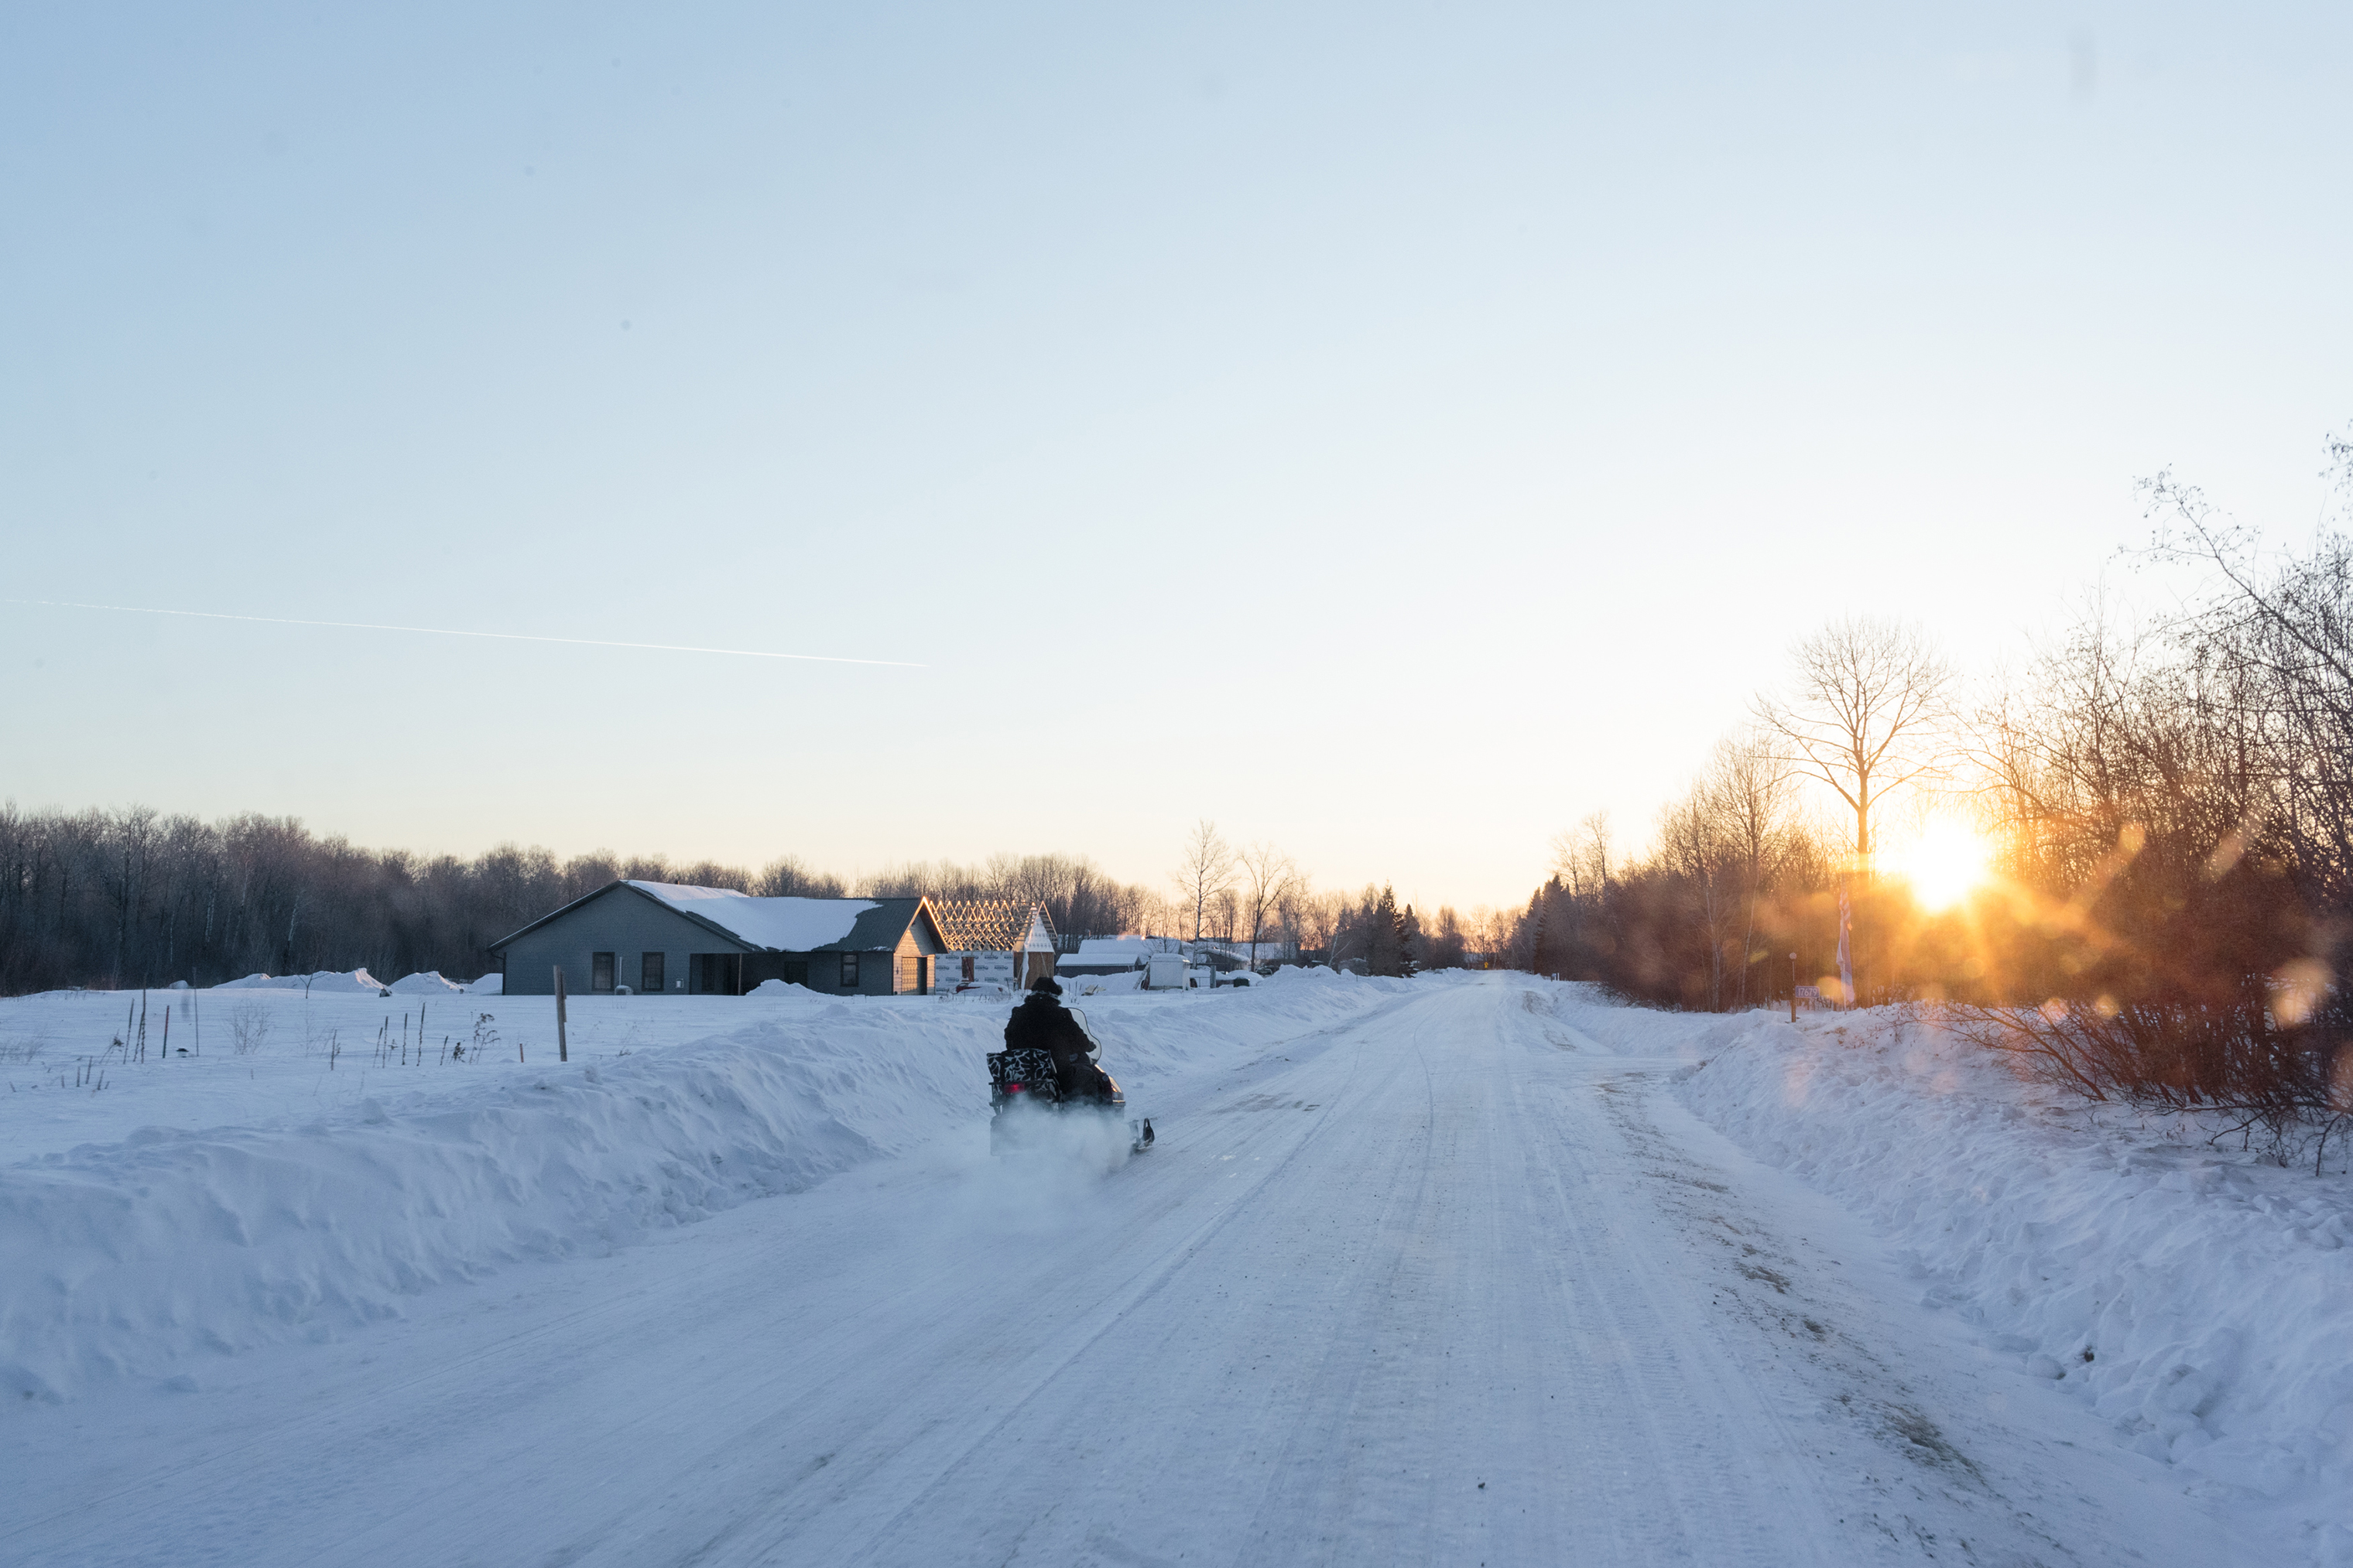 Linda LaMie commutes to school at 6:30 in the morning, in -20 degree weather, and has been the teacher at the one room schoolhouse in Angle Inlet for over thirty years. (Sarah Blesener for TIME)